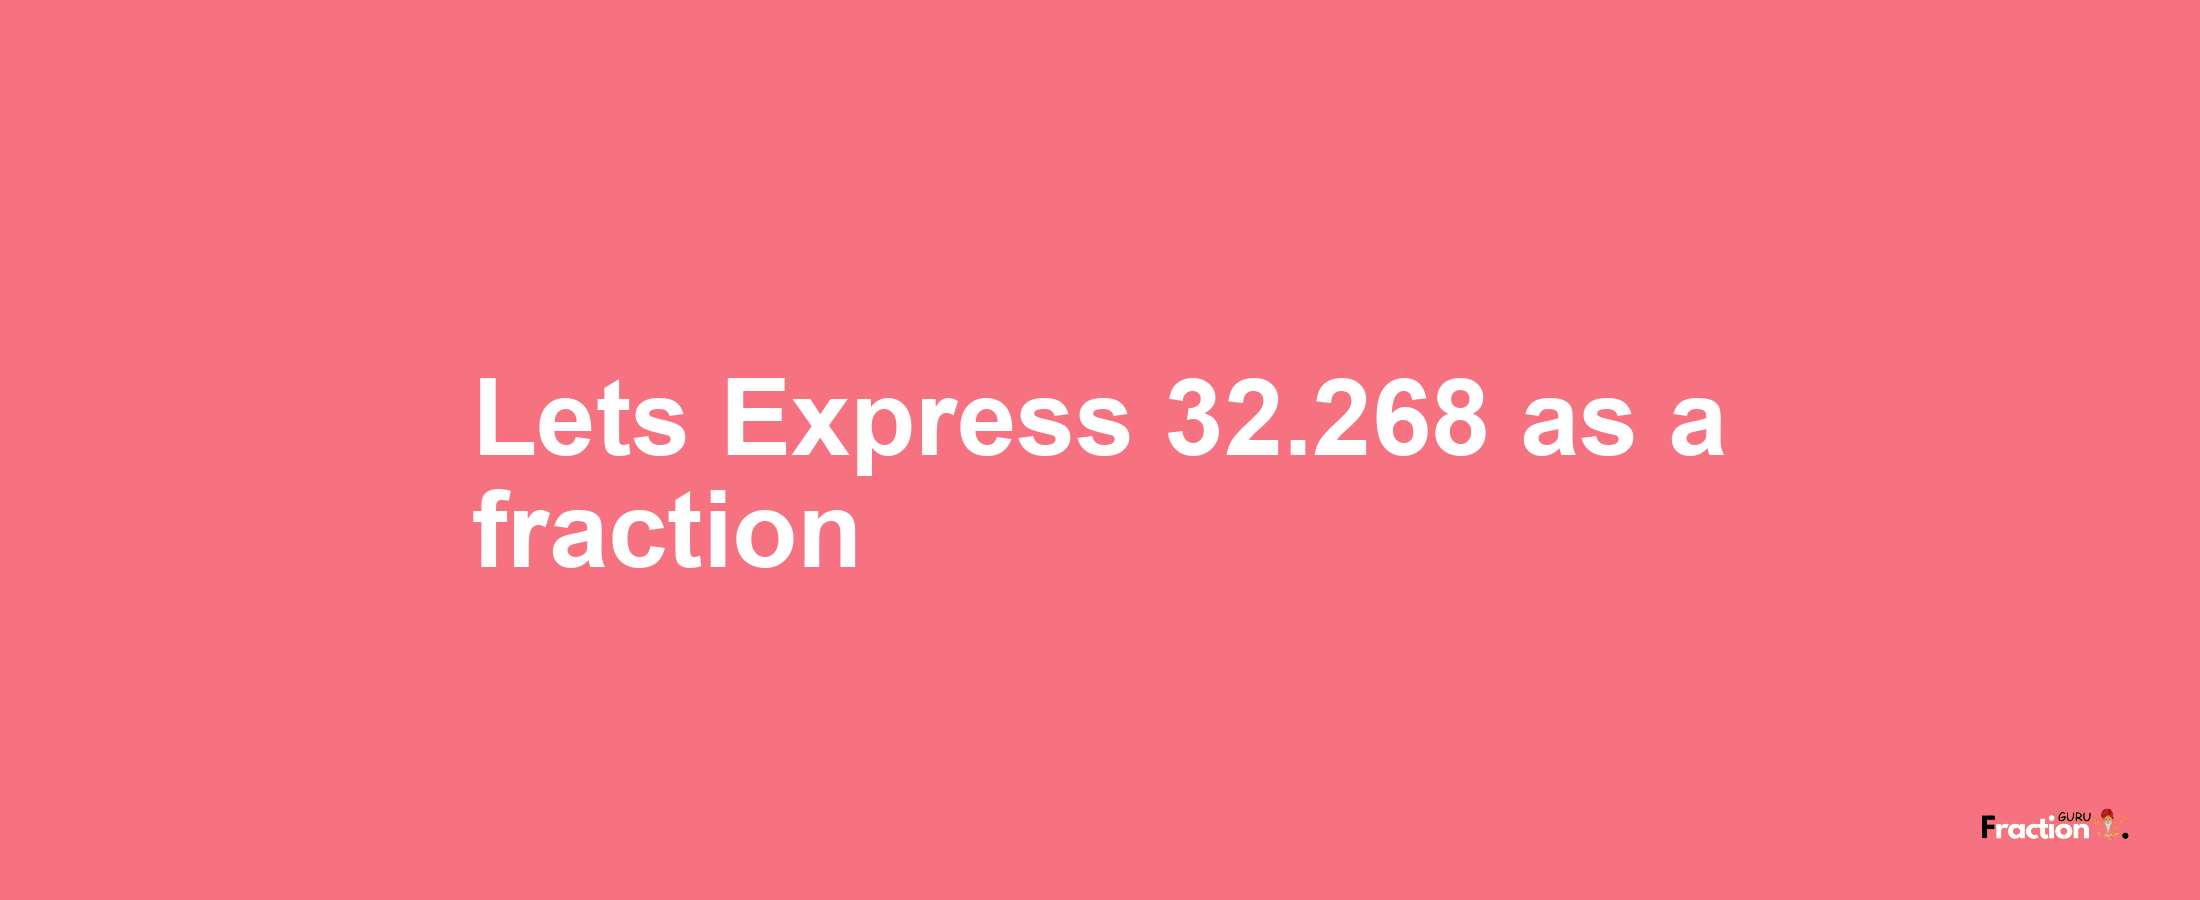 Lets Express 32.268 as afraction